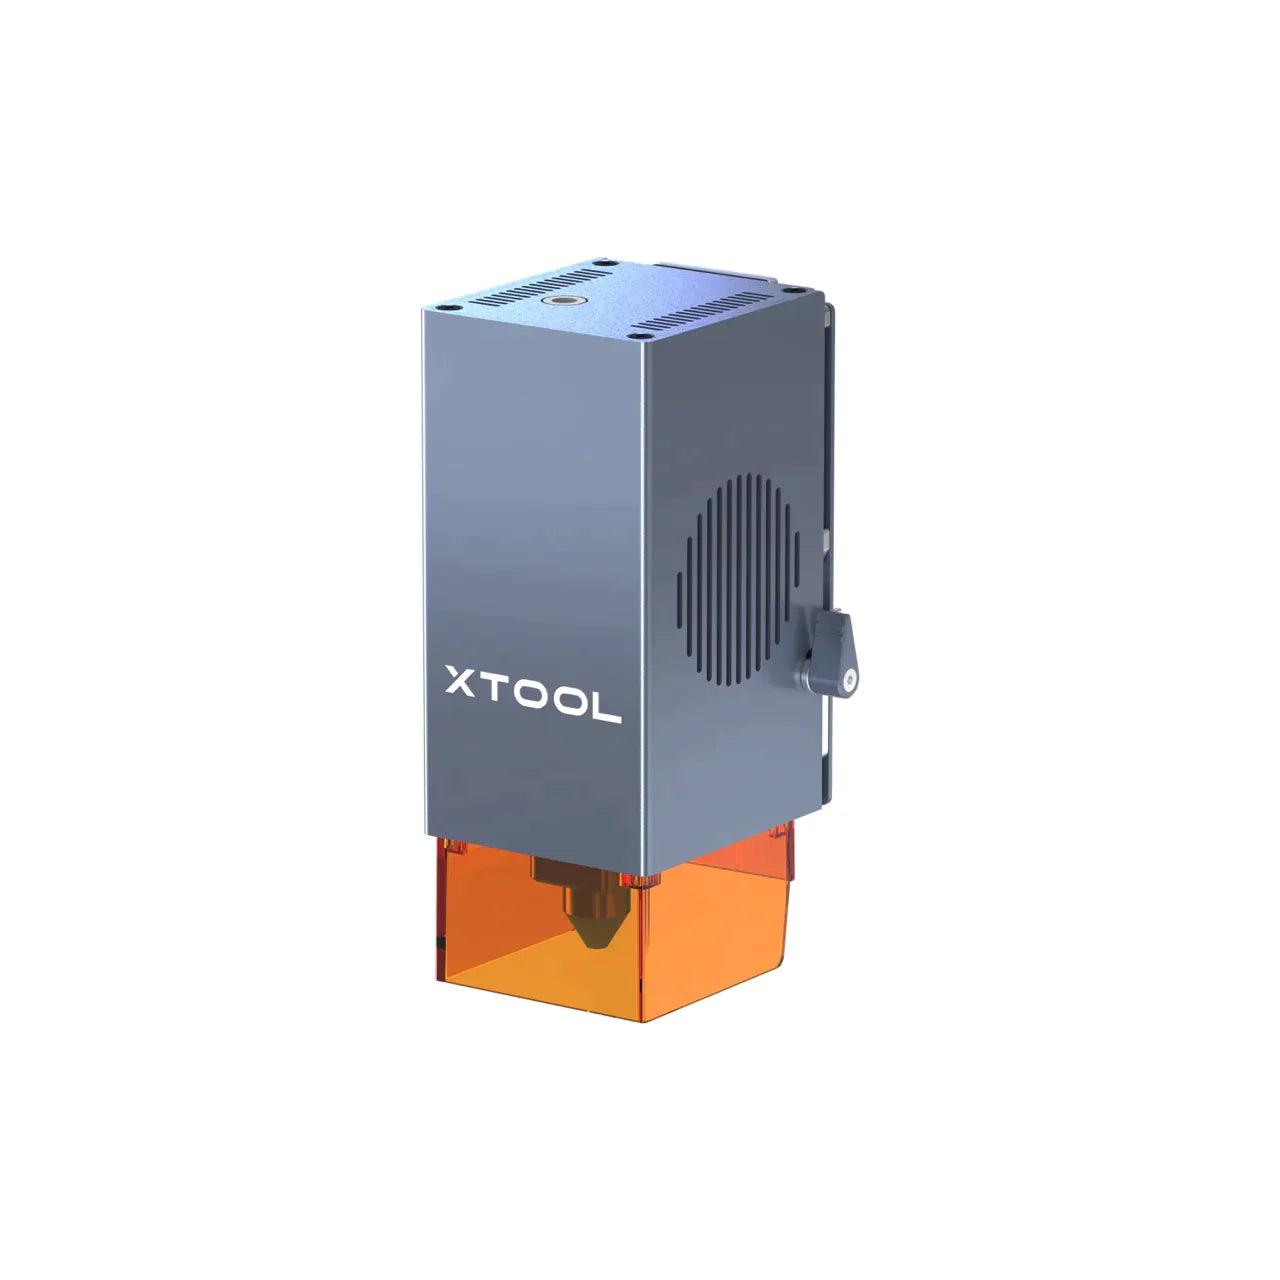 xTool D1 Pro Module laser 40W - xTool France Store